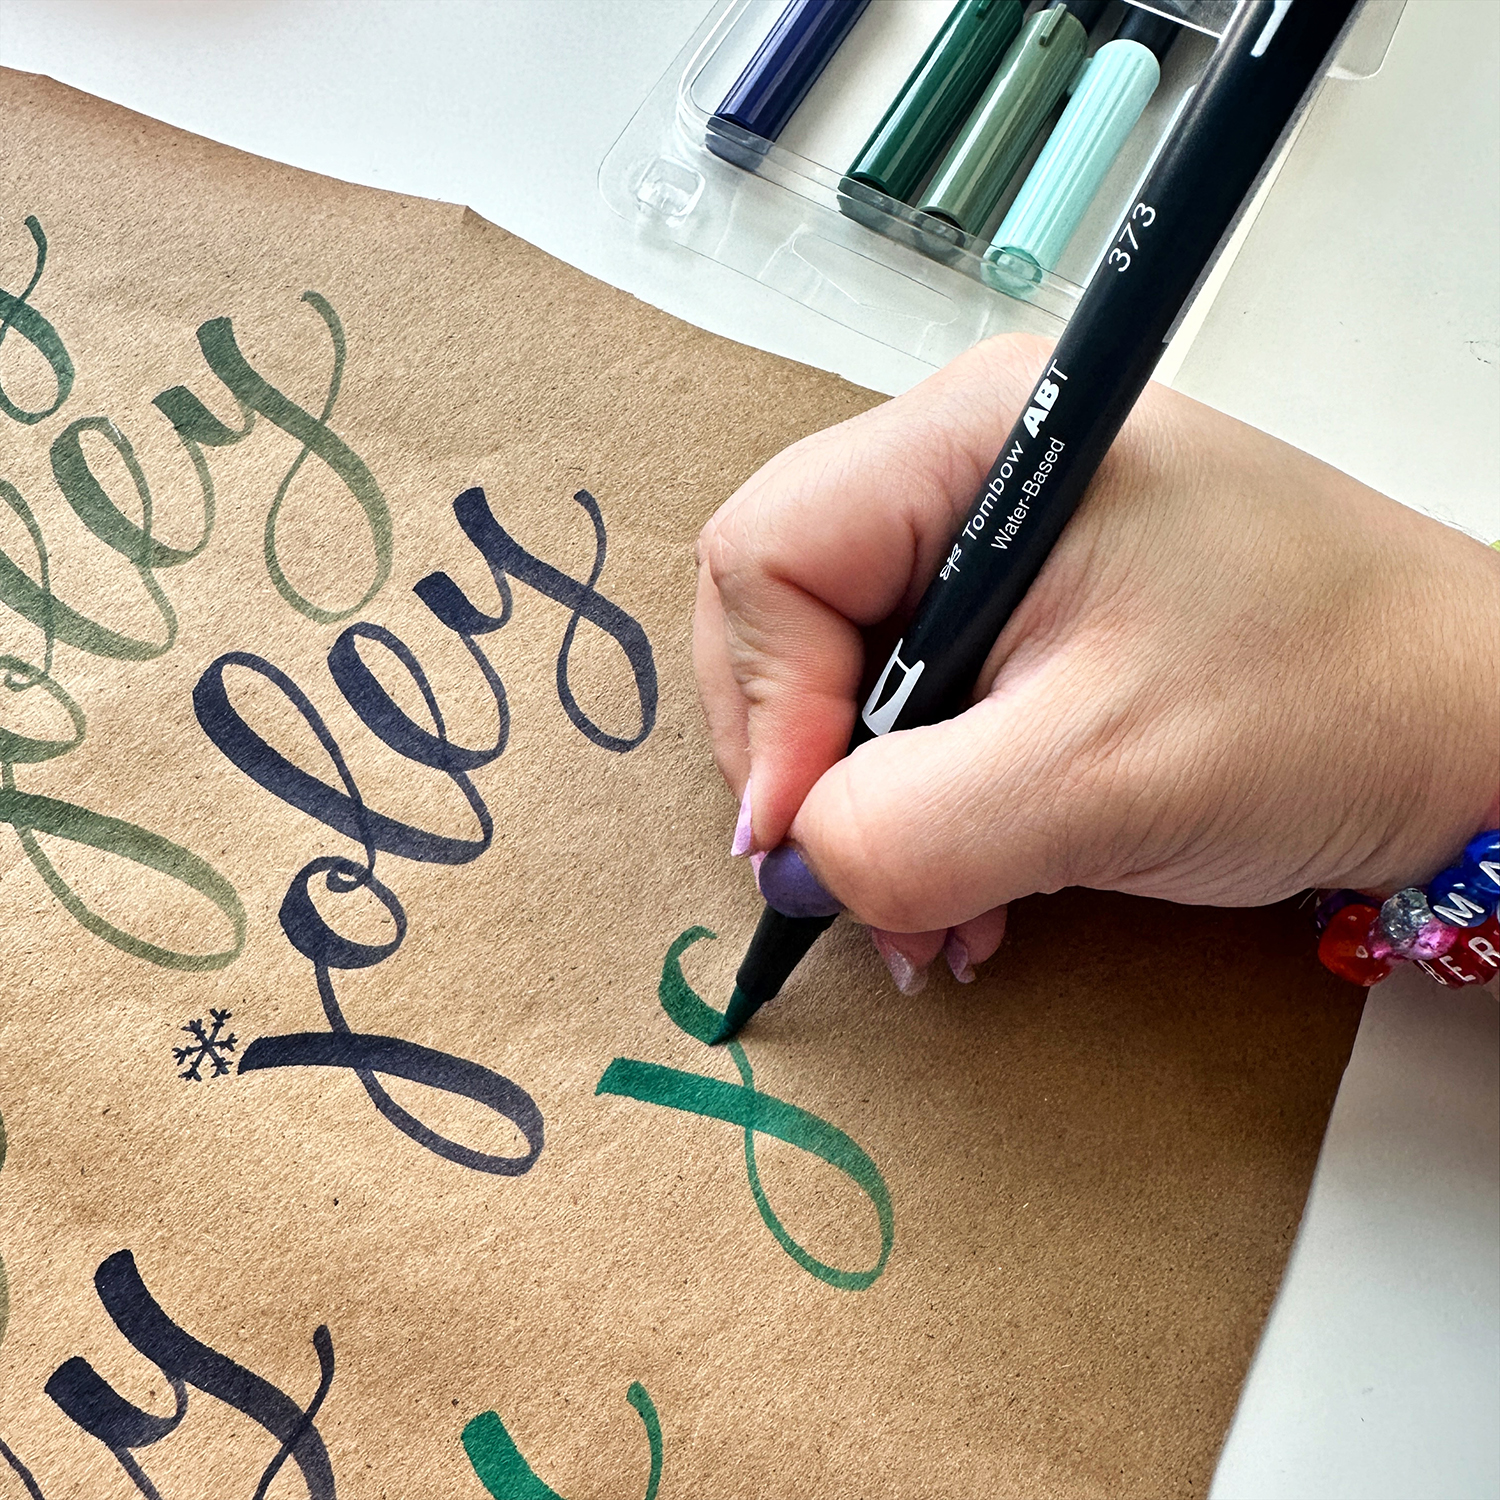 Use lettering to create your own wrapping paper using the Tombow Dual Brush Pens. #tombow #giftwrapping